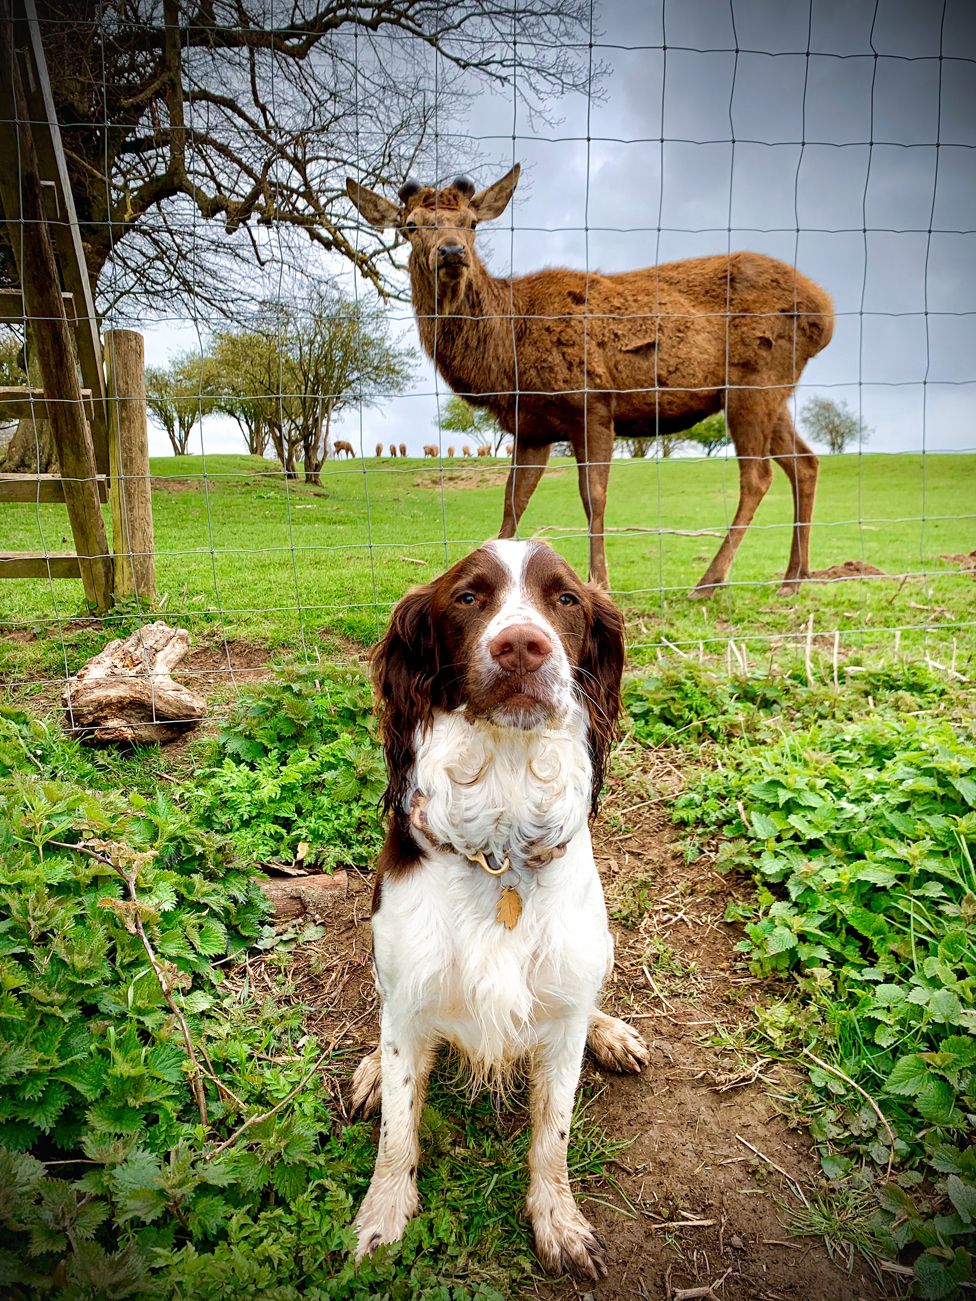 A pet dog and a deer on opposing sides of a wire fence